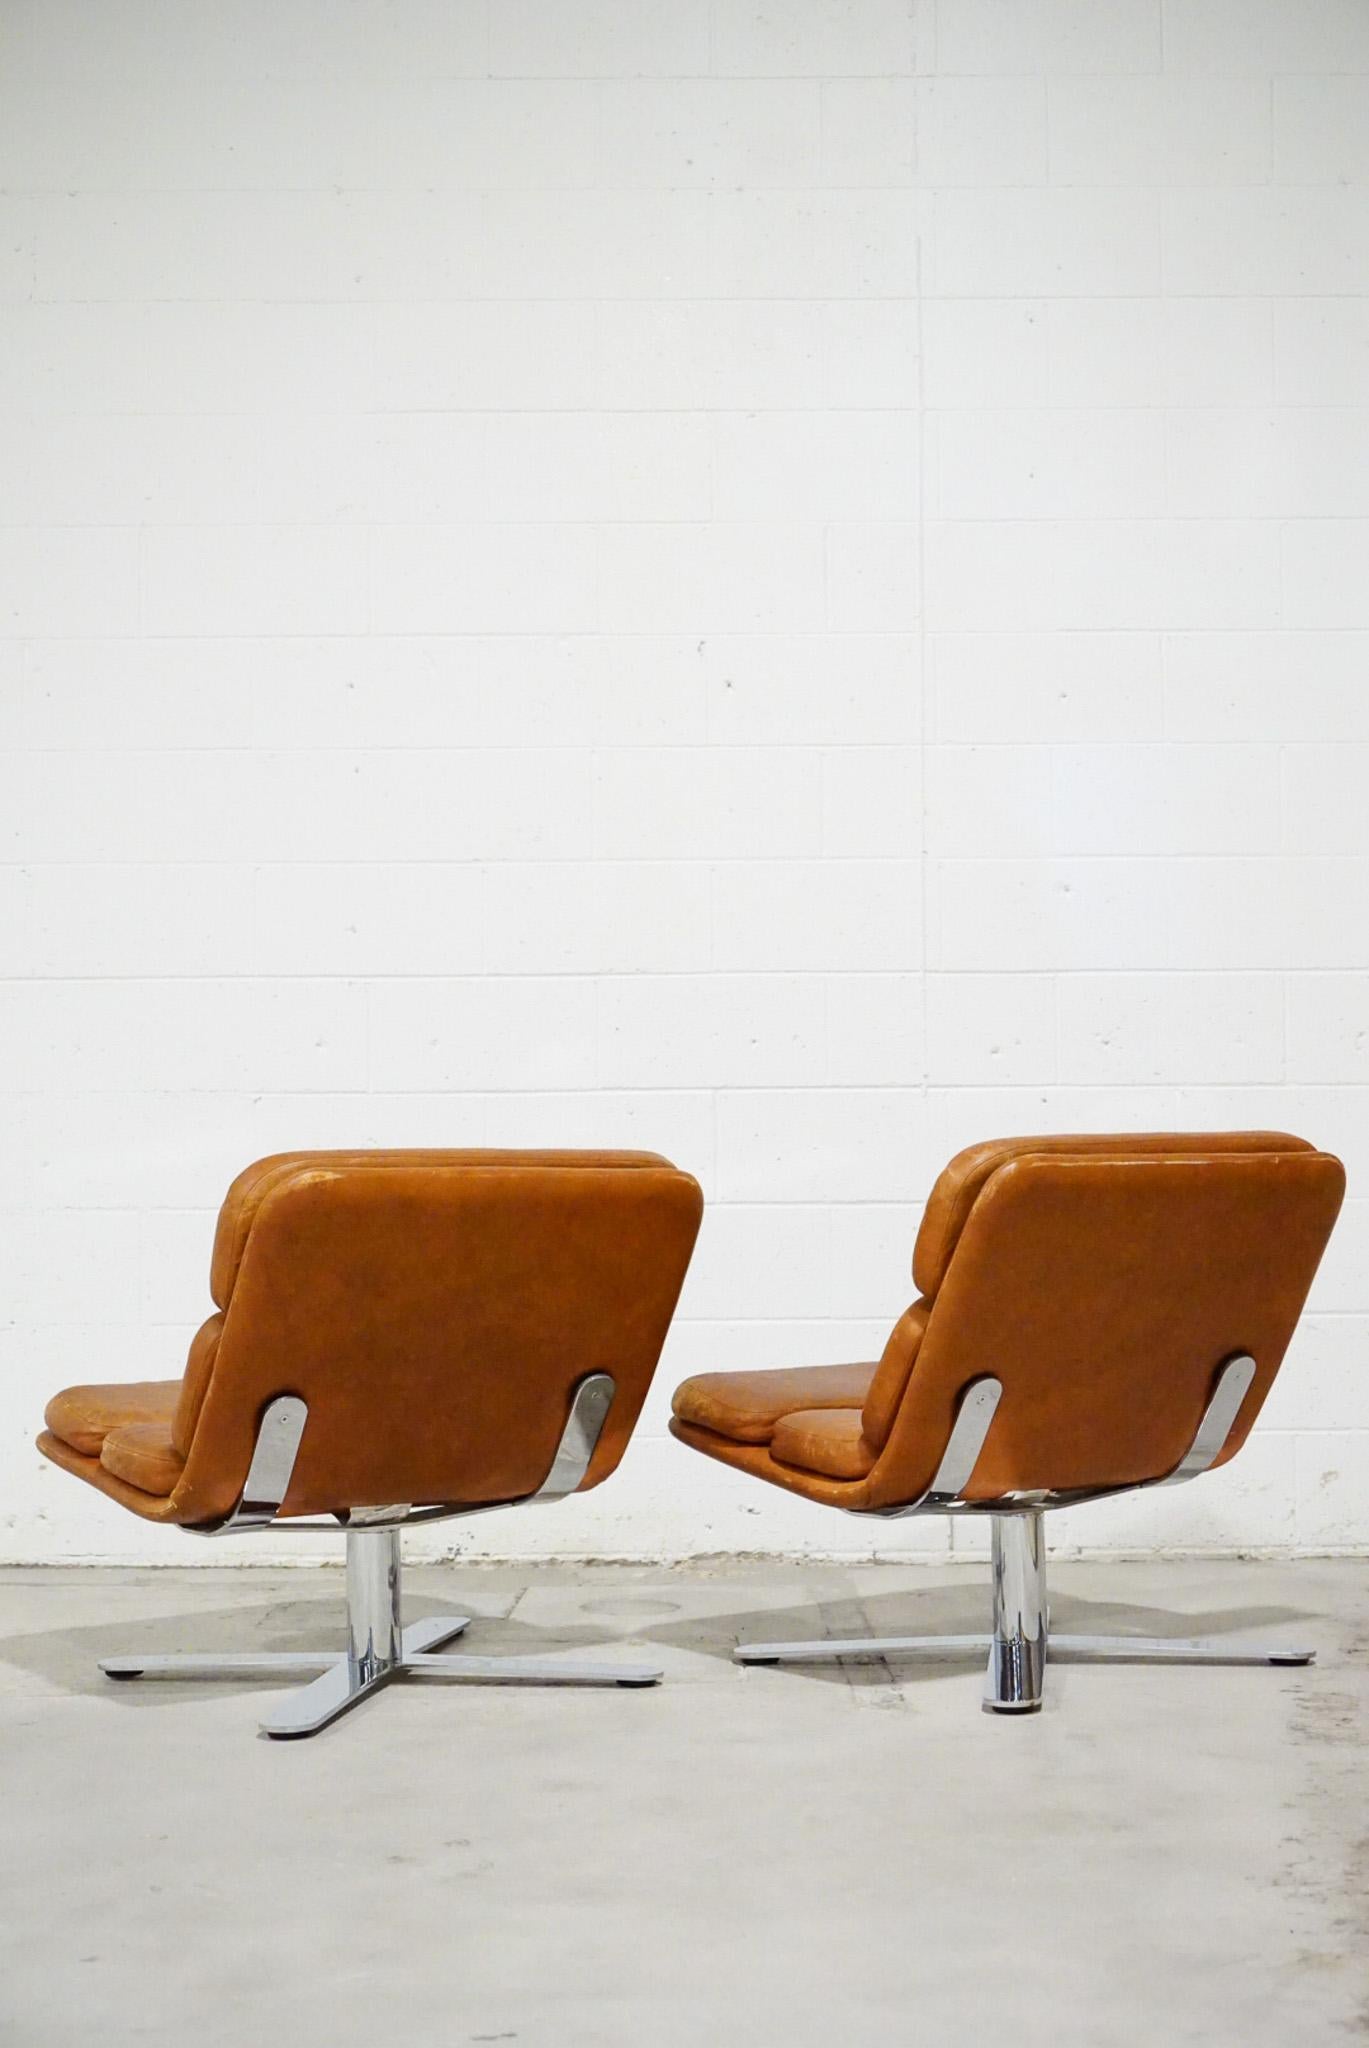 Hand-Crafted John Follis Pair of Patinated Leather Lounge Chairs, 1970s California